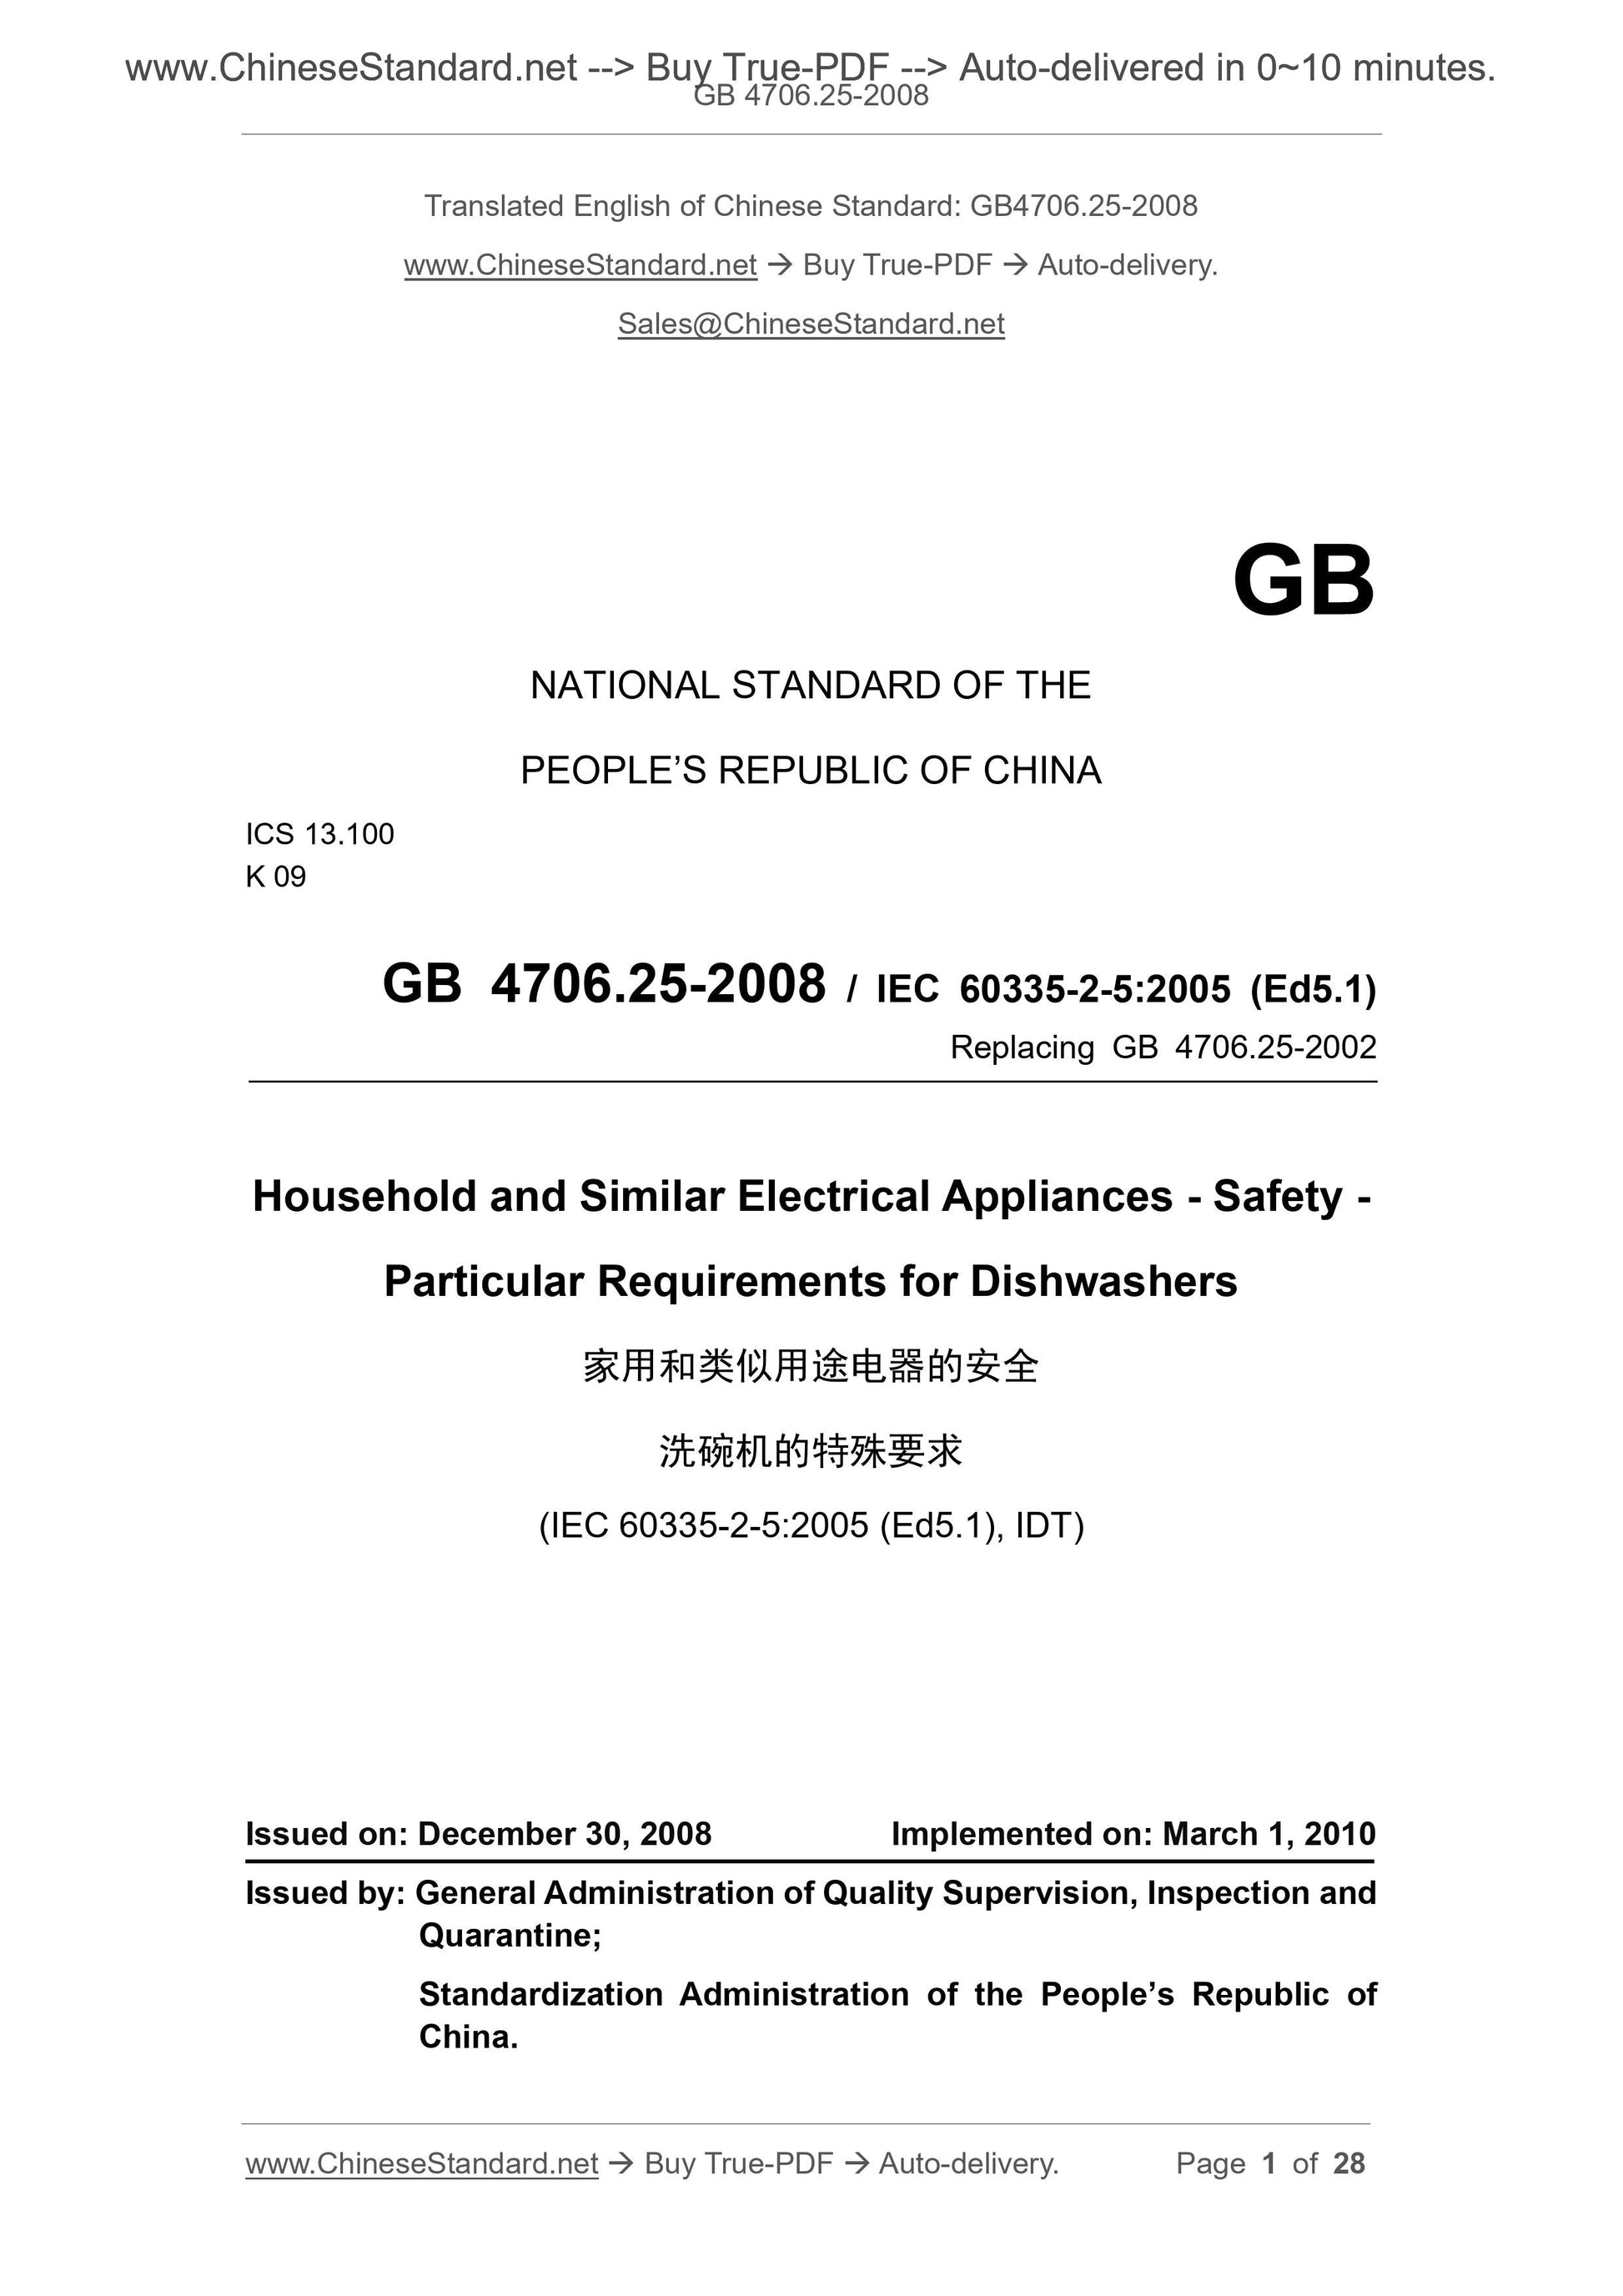 GB 4706.25-2008 Page 1